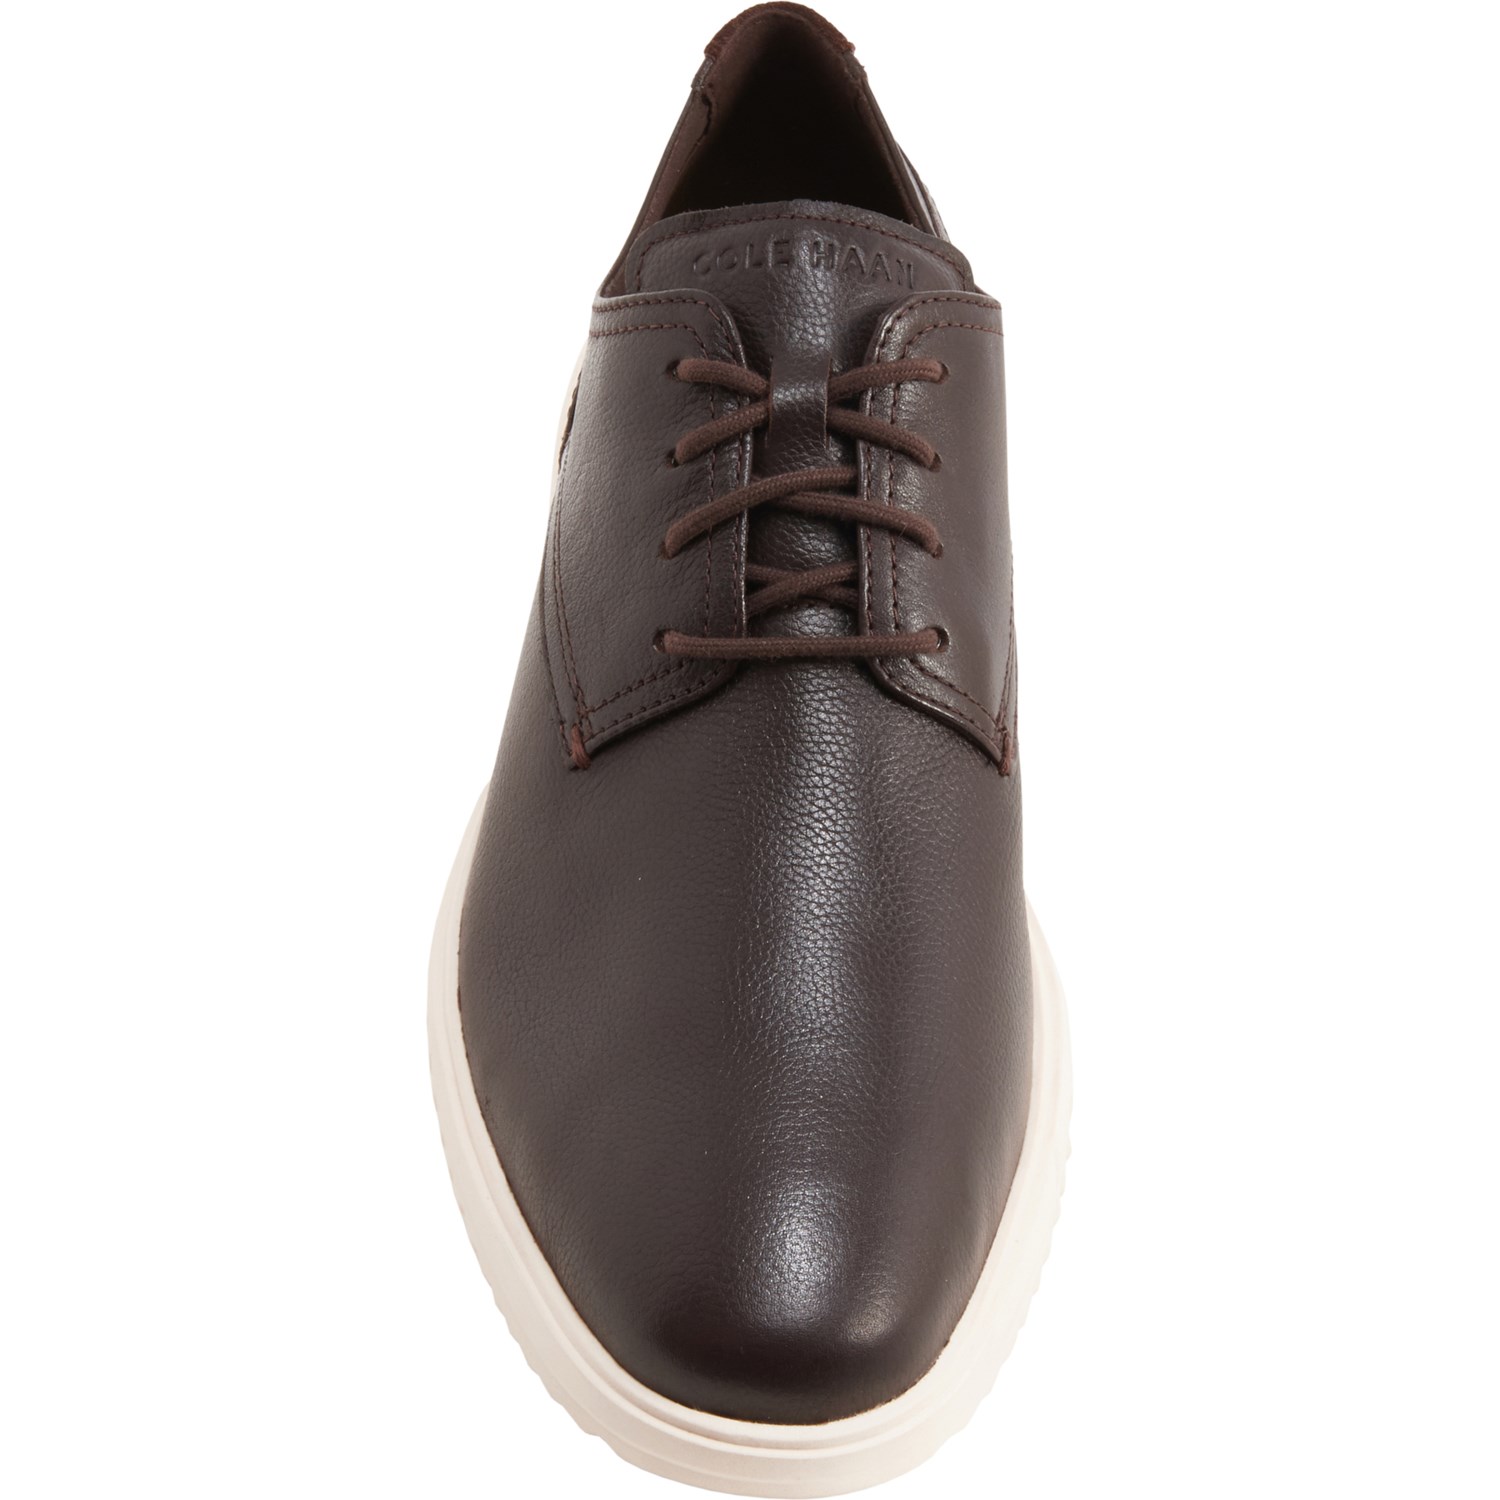 Cole Haan Grand+ Plain Toe Oxford Golf Shoes (For Men) - Save 33%